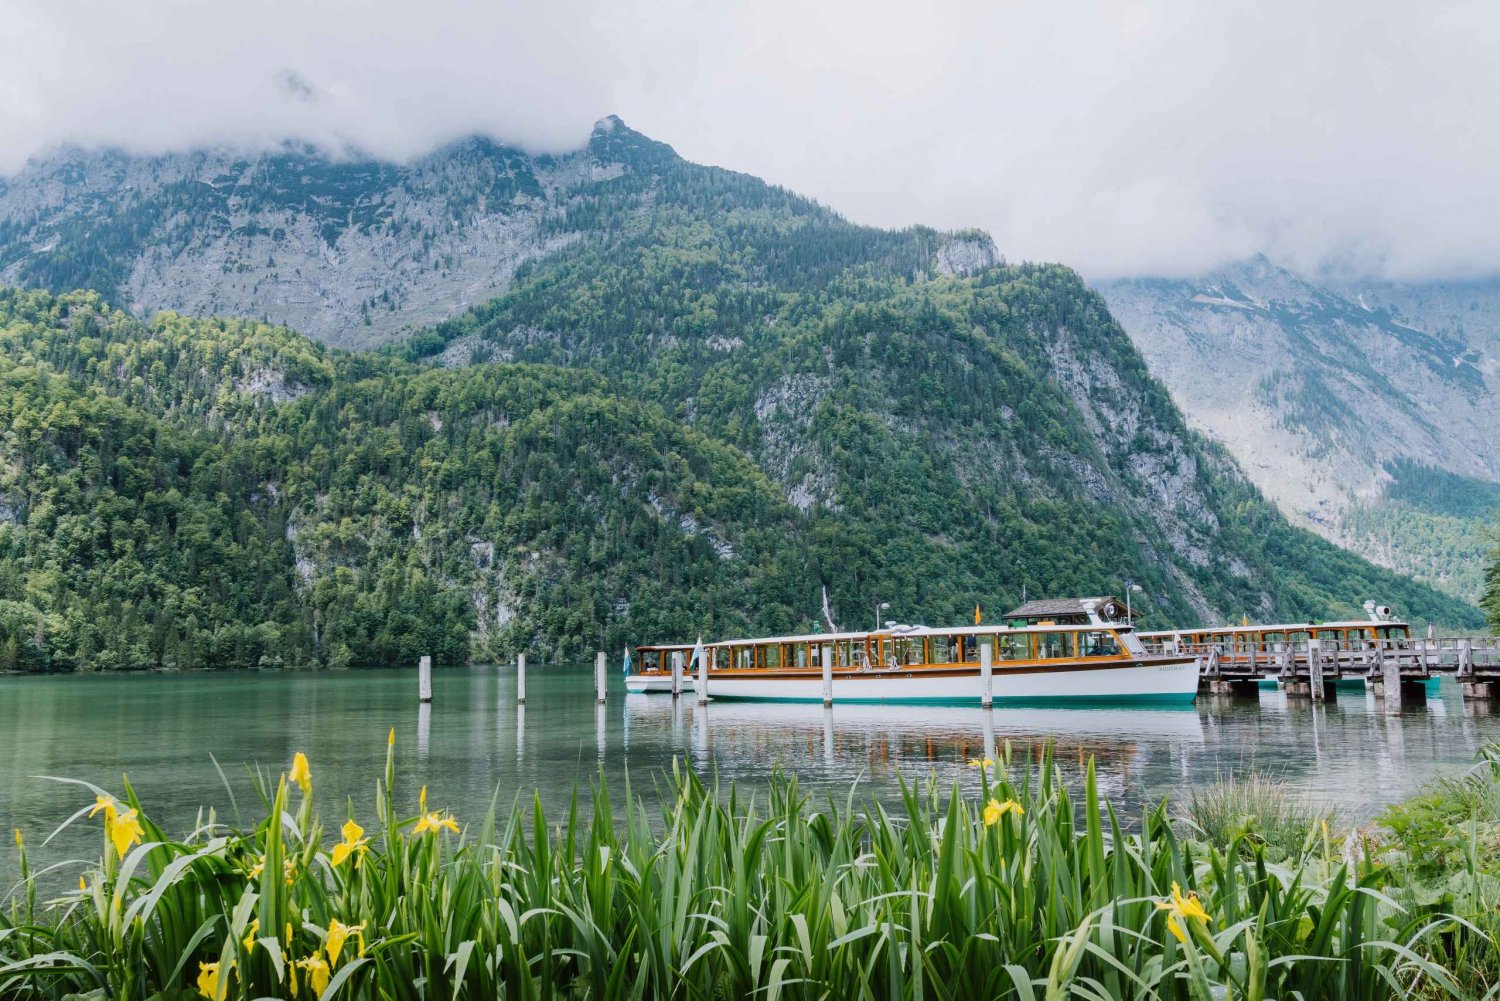 Königssee Full-Day Tour from Munich: Groups of 4 or More